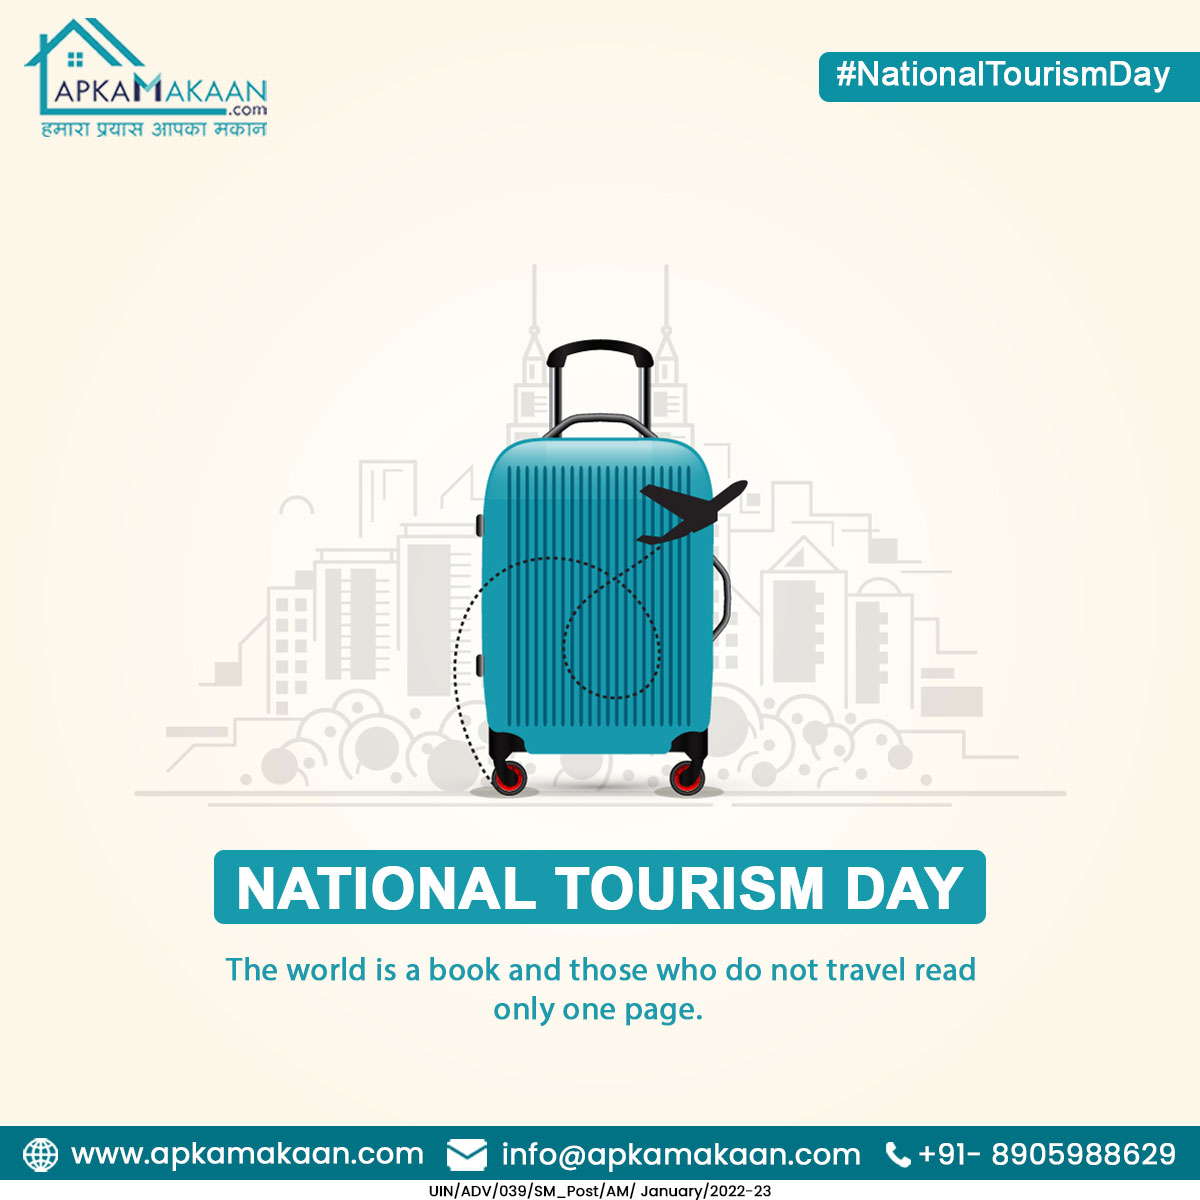 Travel, explore, know, to learn! Happy National Tourism Day!
#apkamakaan #travelday #traveldays #travel #BoycottPathan  #tourism #tourism #tourismalgeria #मगहर_लीला #PathaanReview